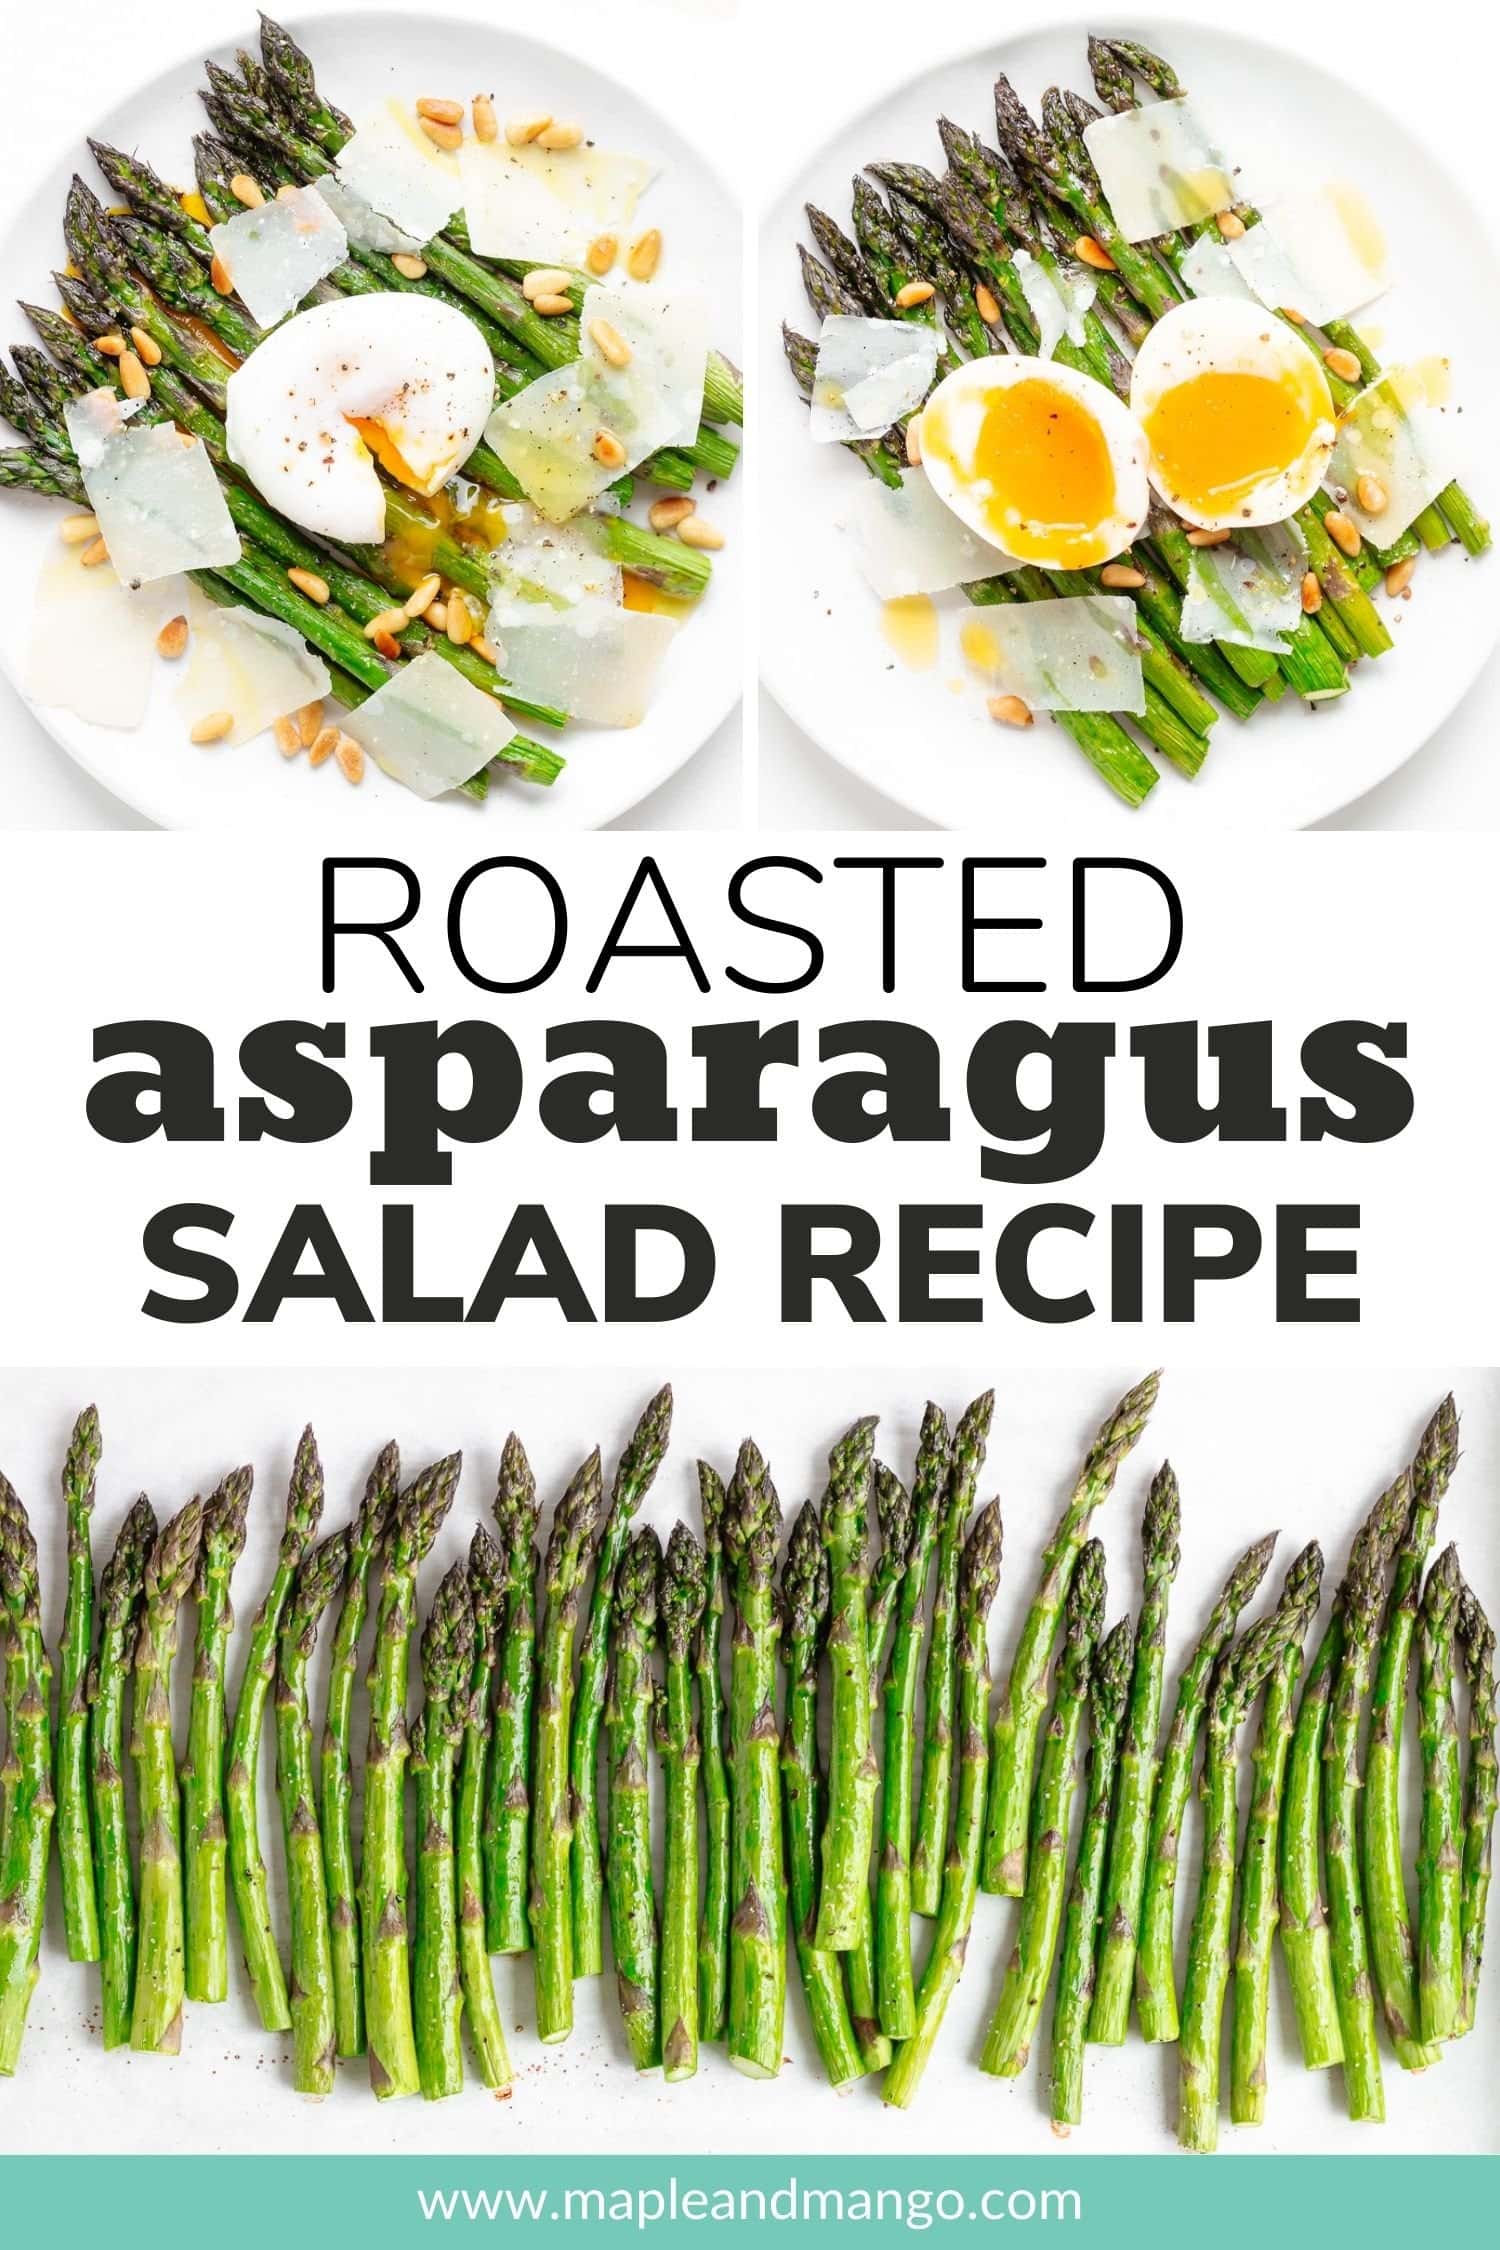 Pinterest collage graphic for Roasted Asparagus Salad Recipe.